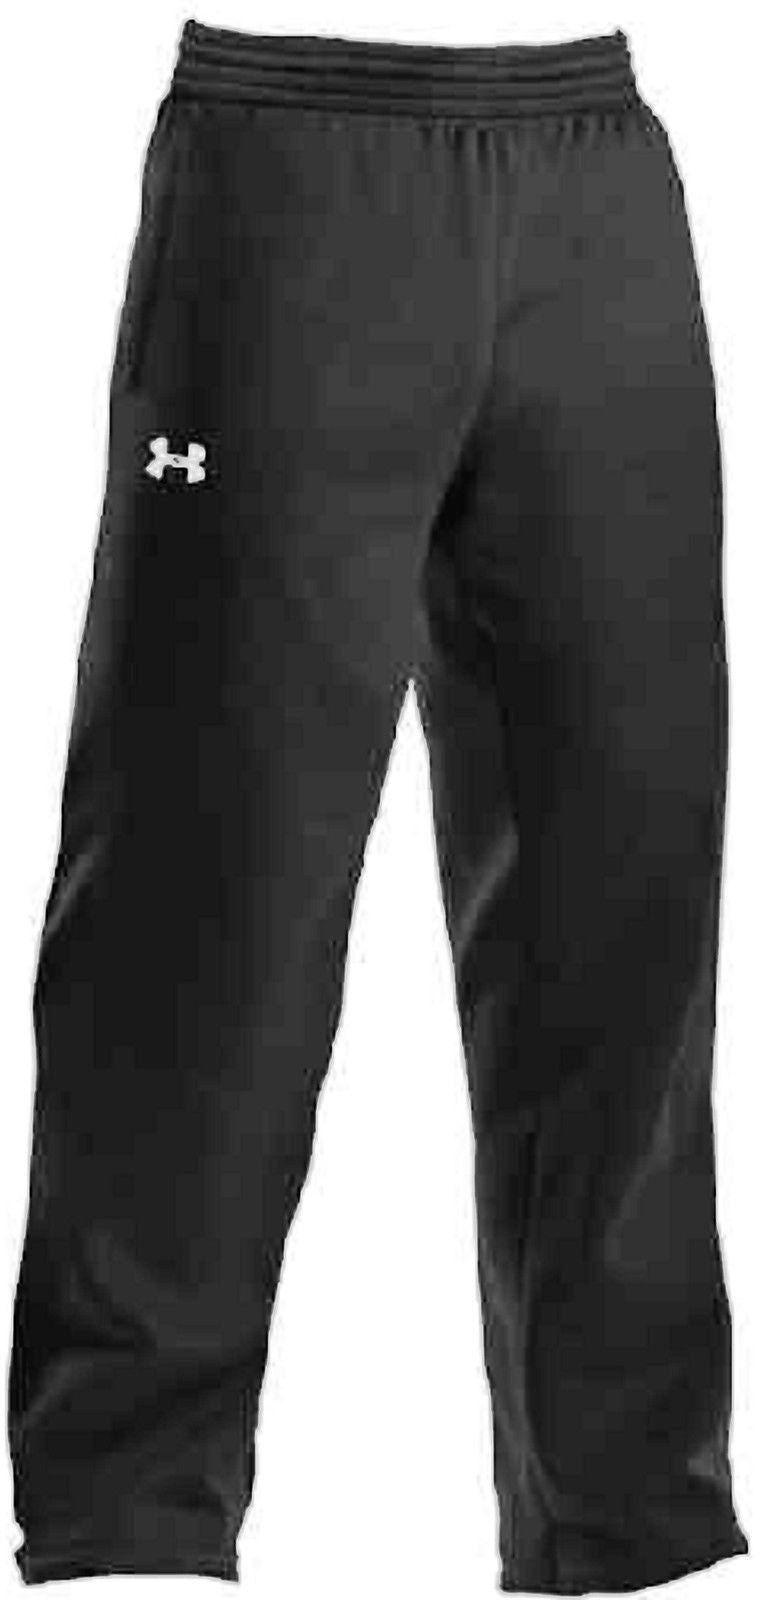 under armour fleece lined pants